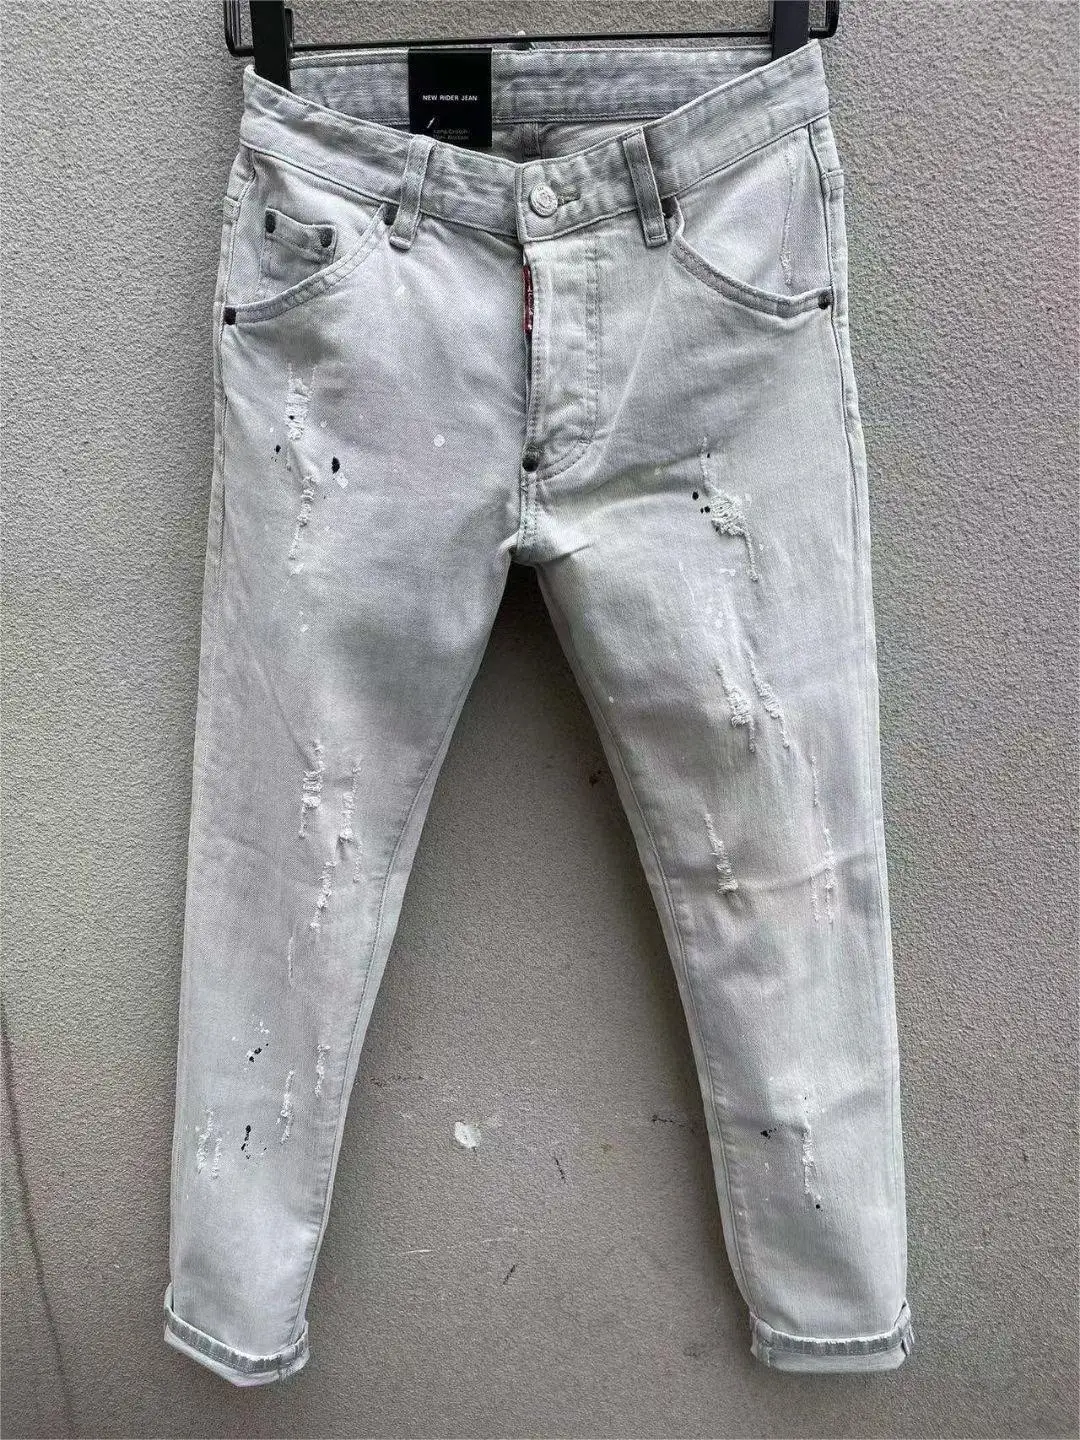 

2023 new fashion tide brand men's washing worn out torn paint motorcycle retro jeans 9103